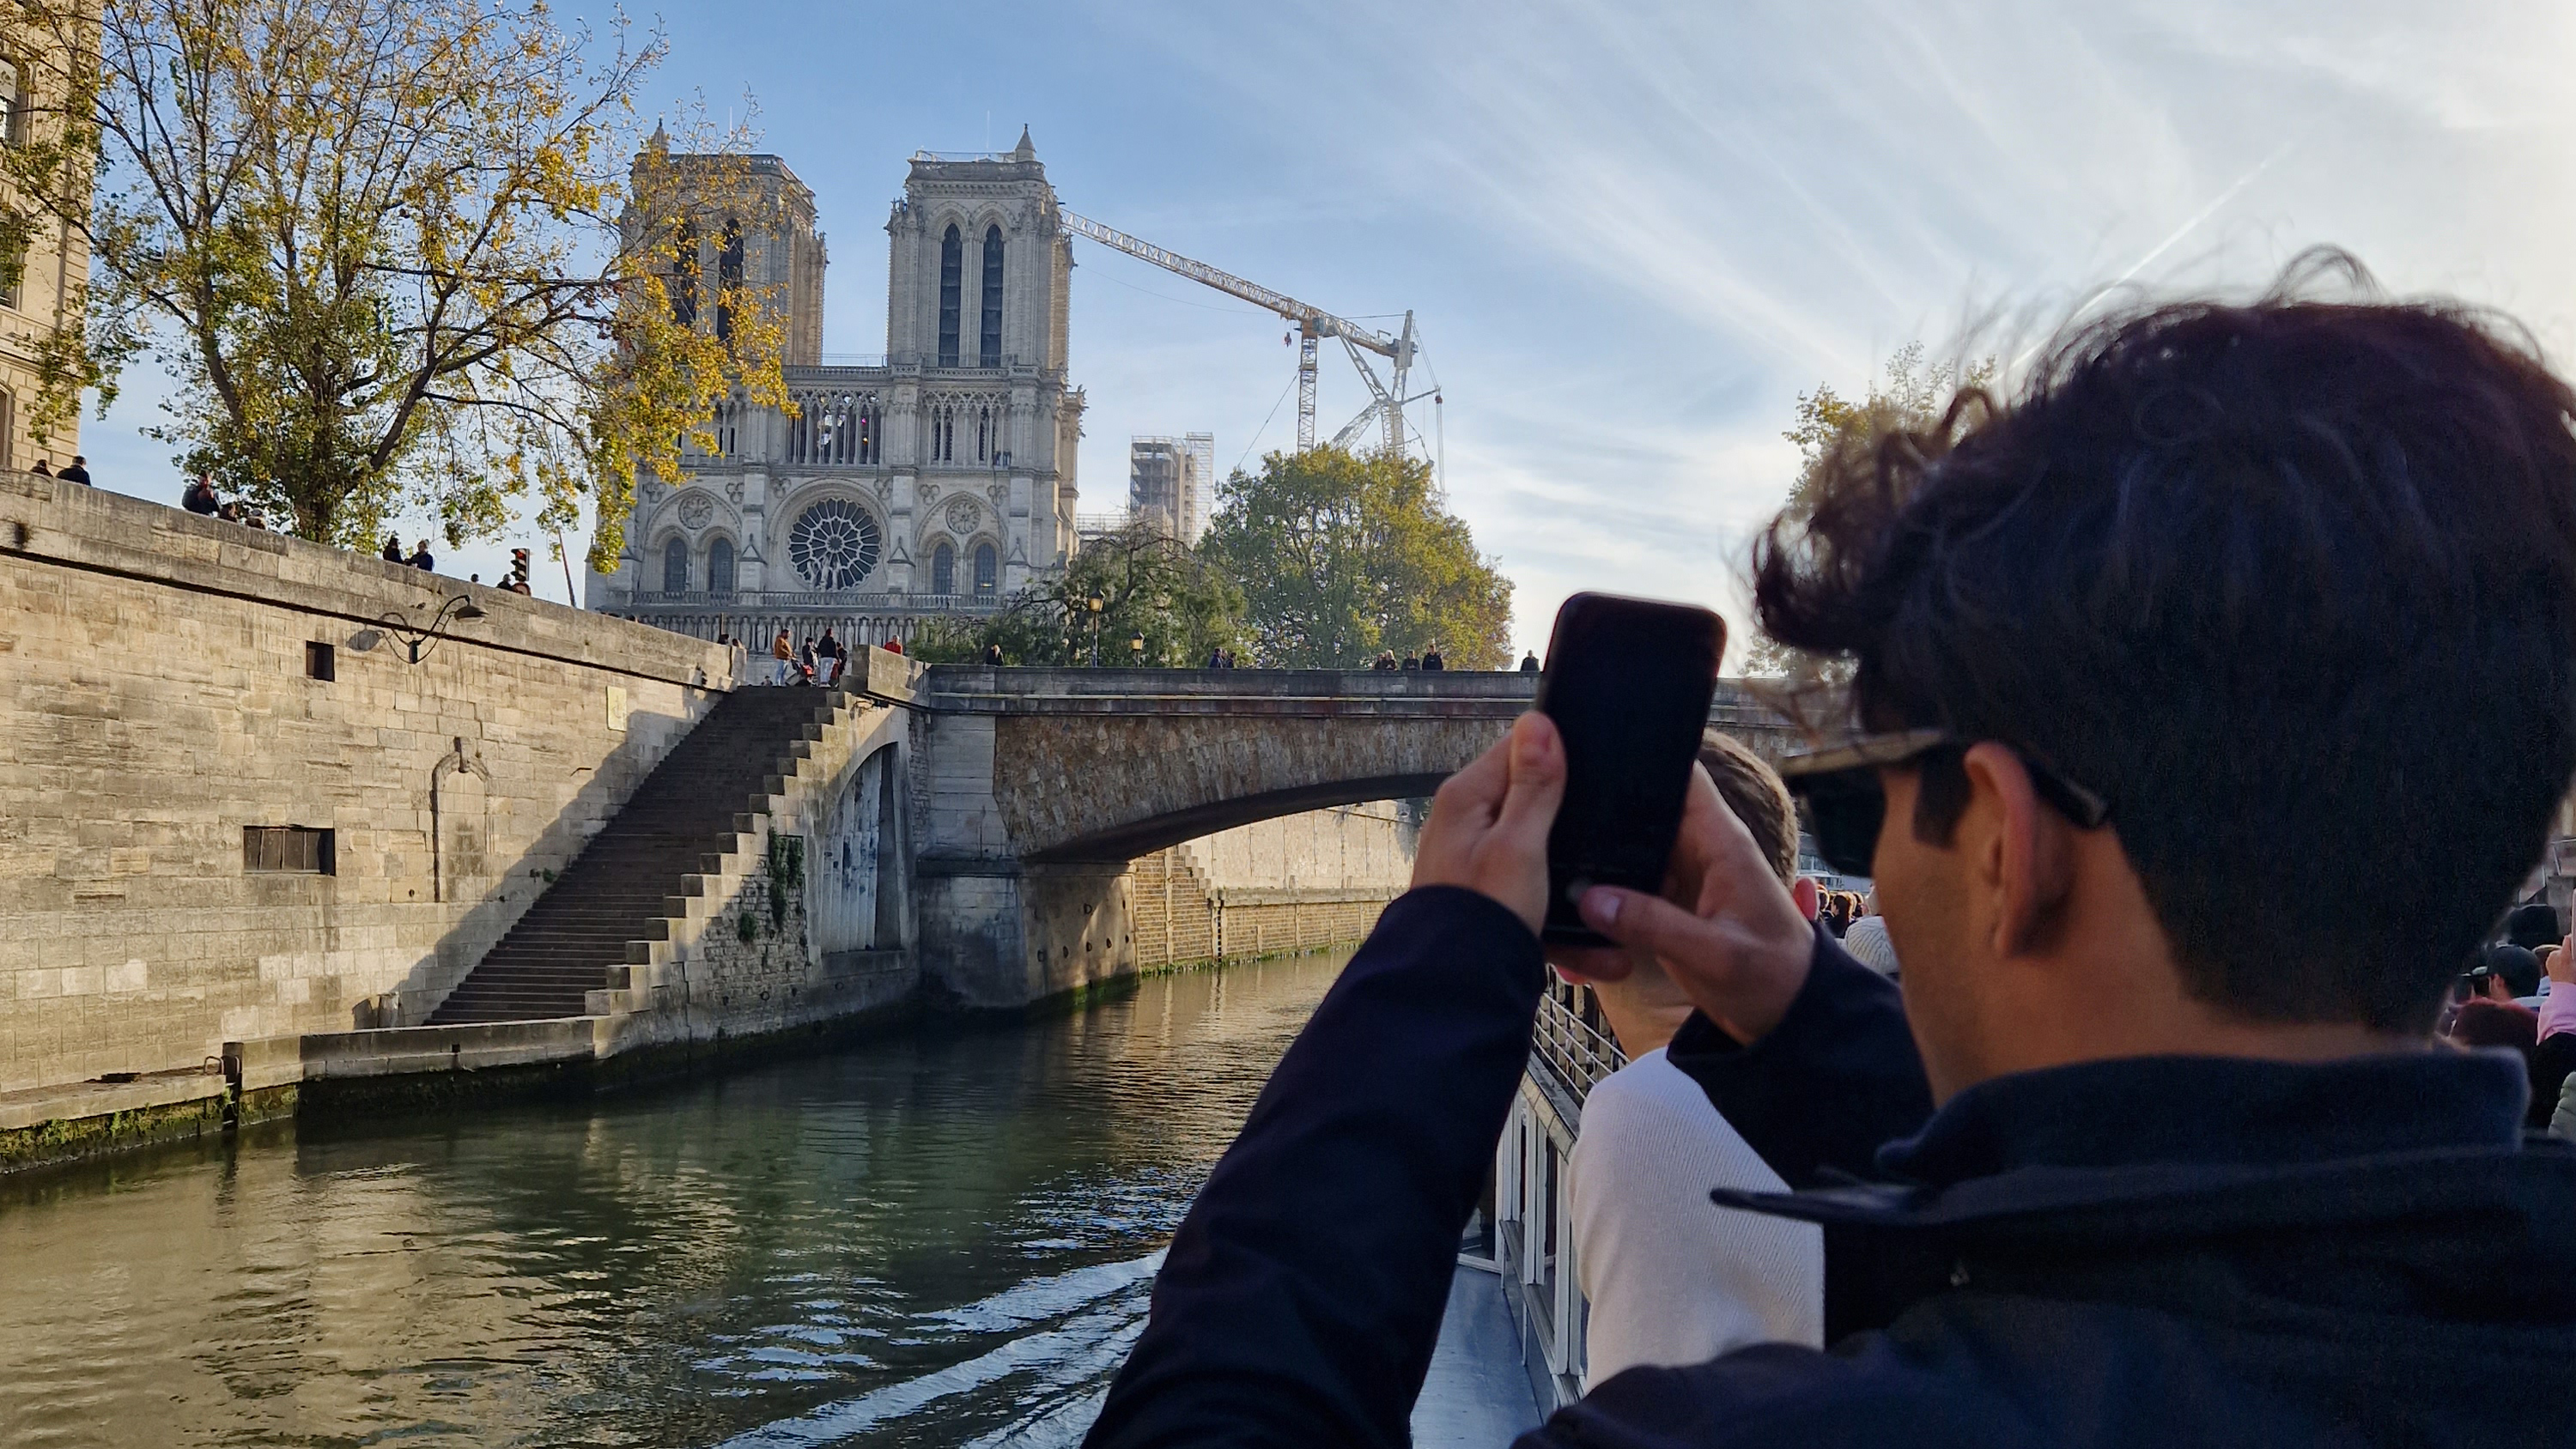 CES student taking a photo of the Notre Dame in Paris